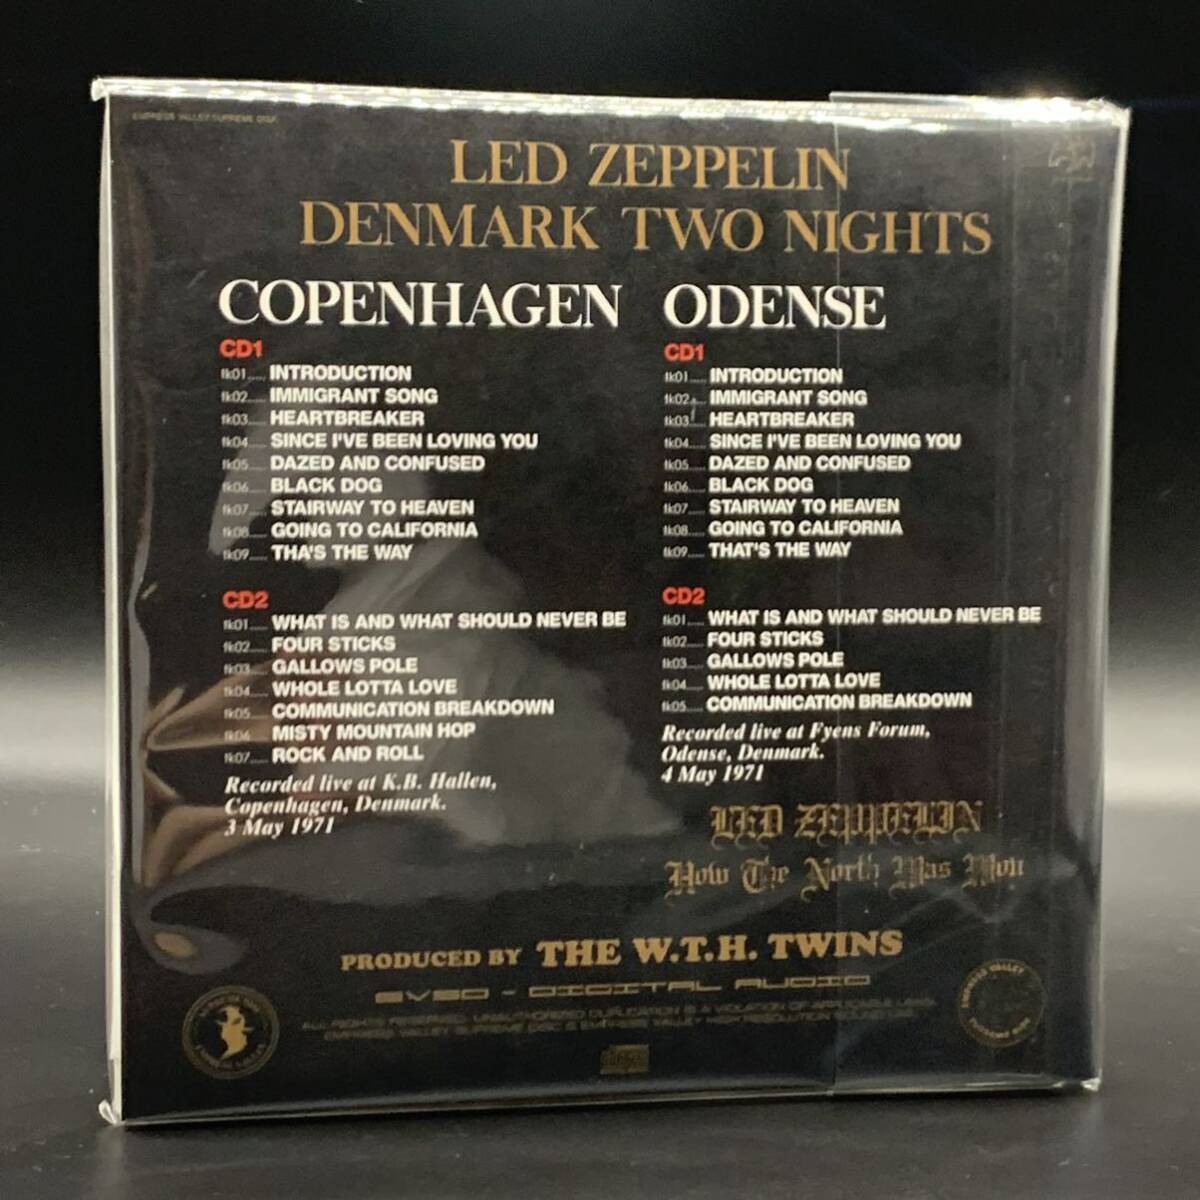 LED ZEPPELIN / HOW THE NORTH WAS WON「北部開拓史」(8CD BOX)